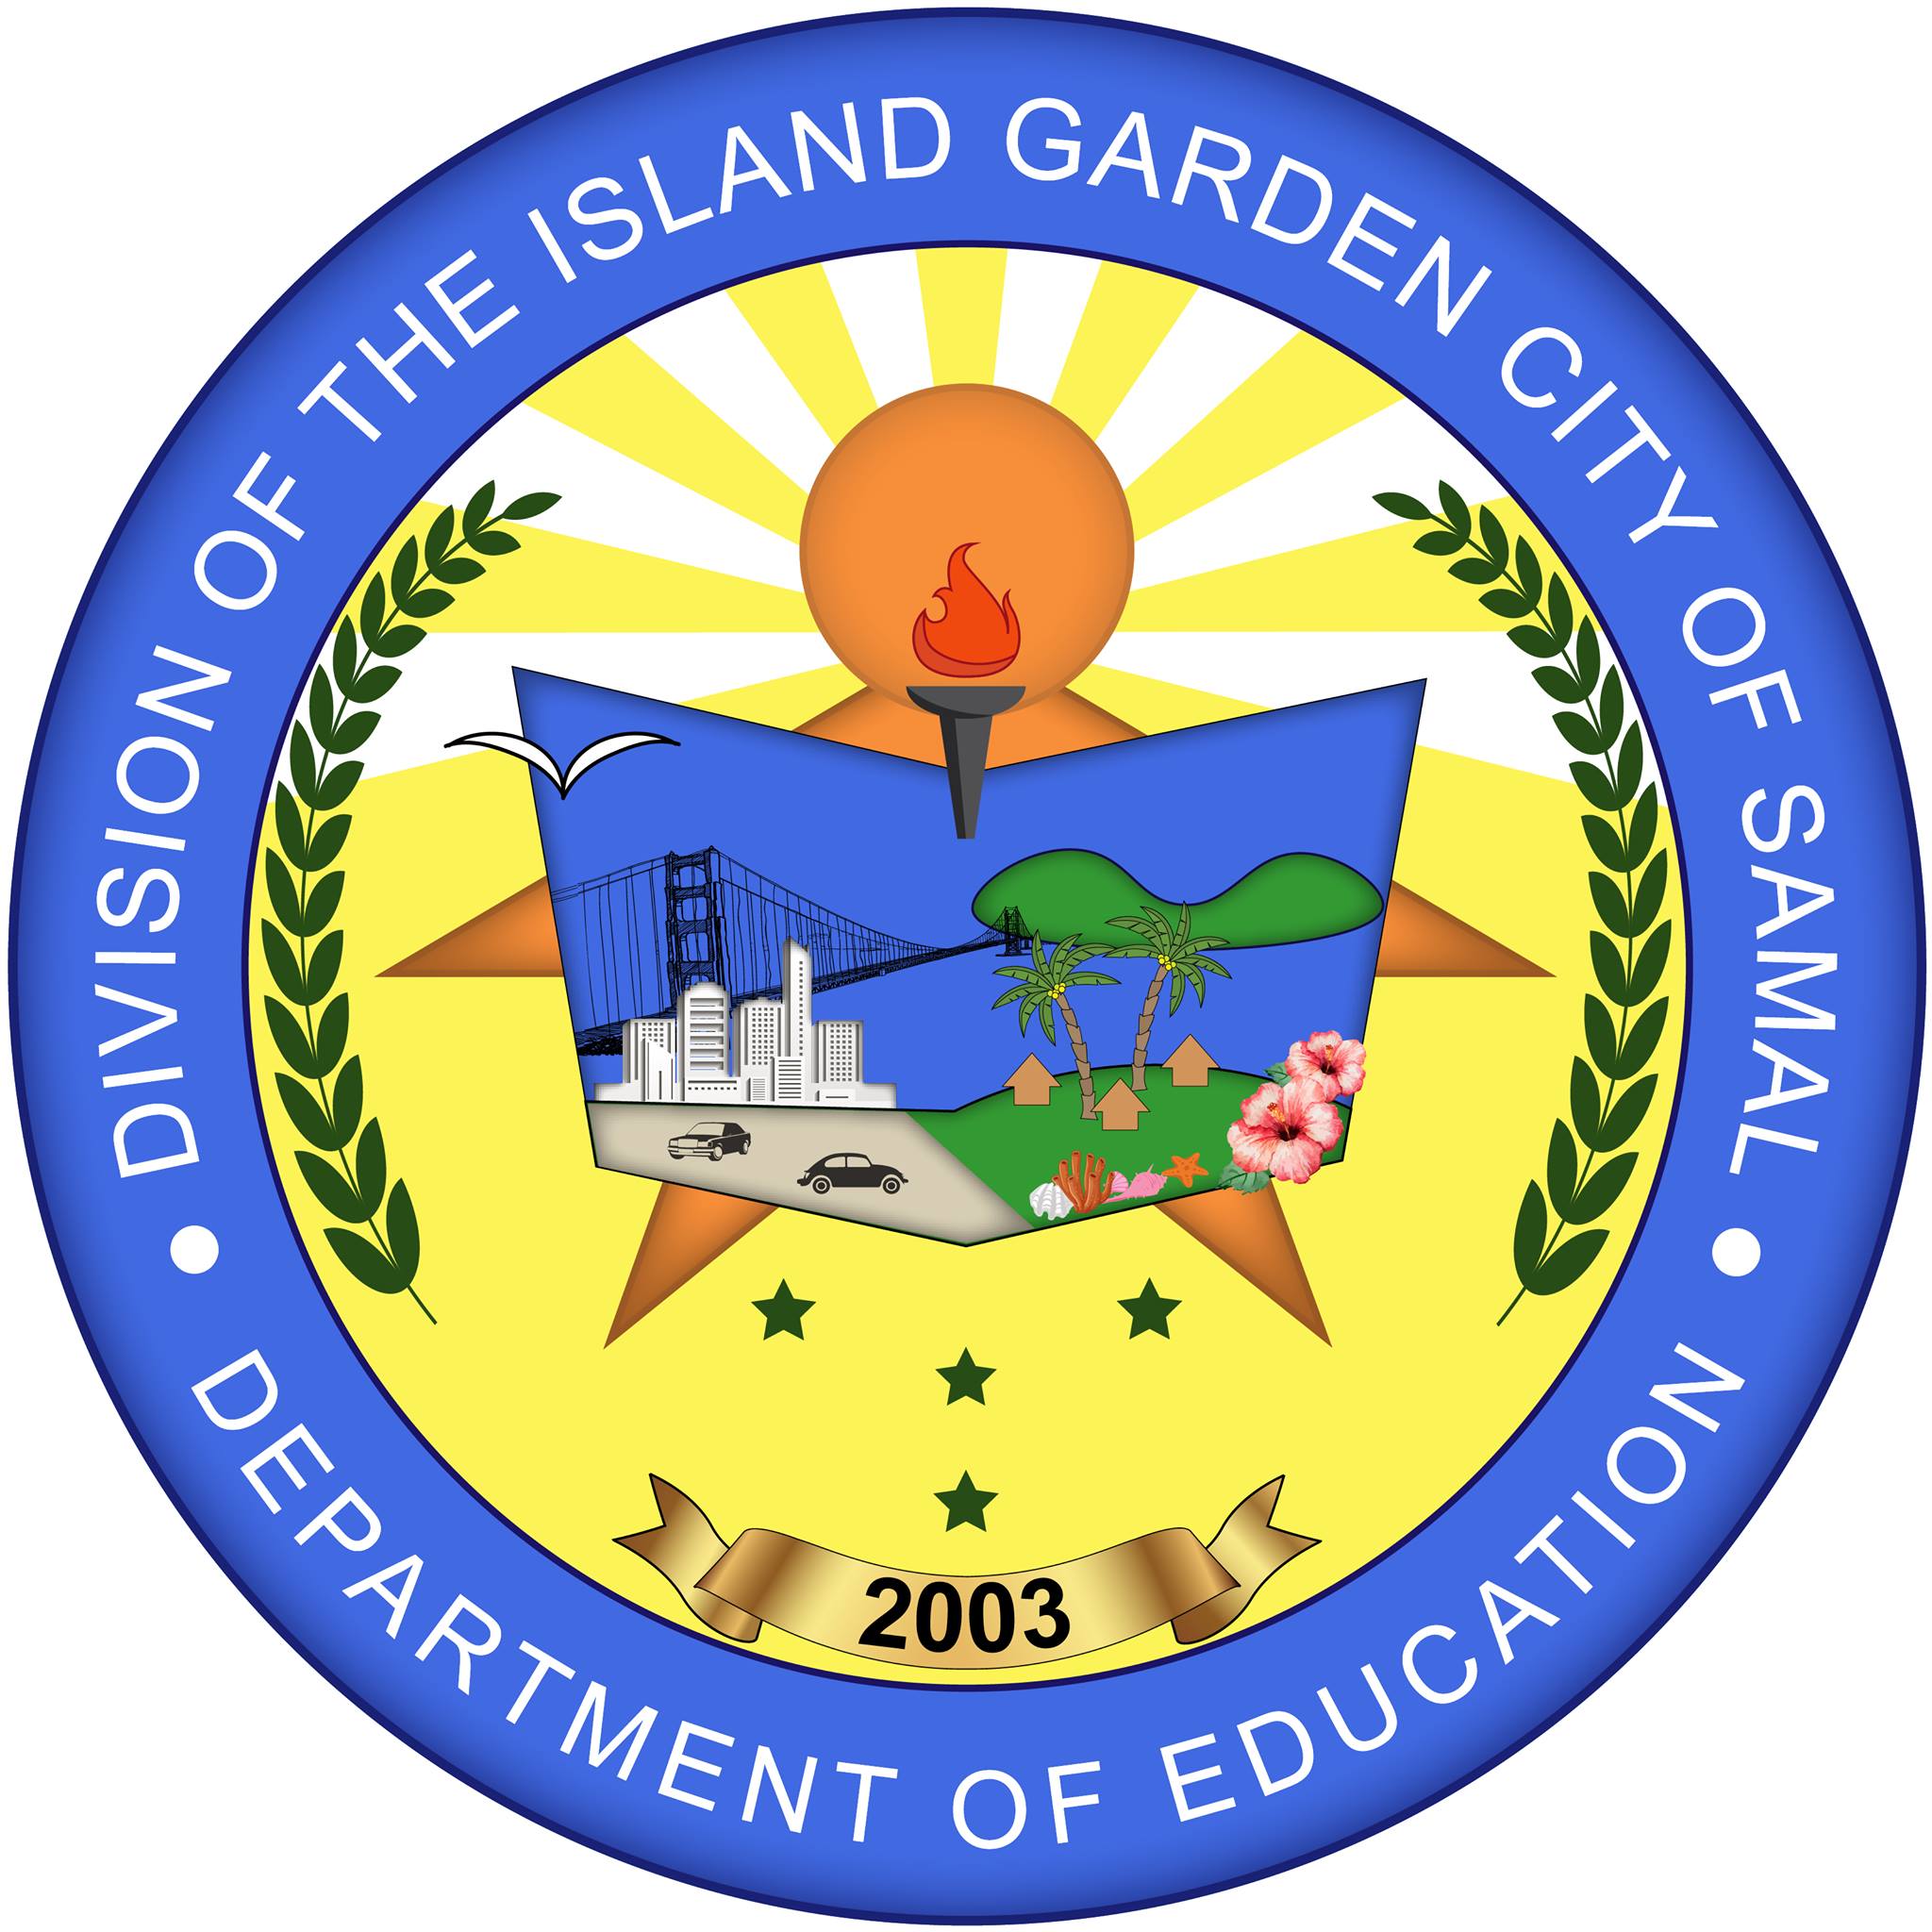 You are currently viewing DepEd – Division of the Island Garden City of Samal